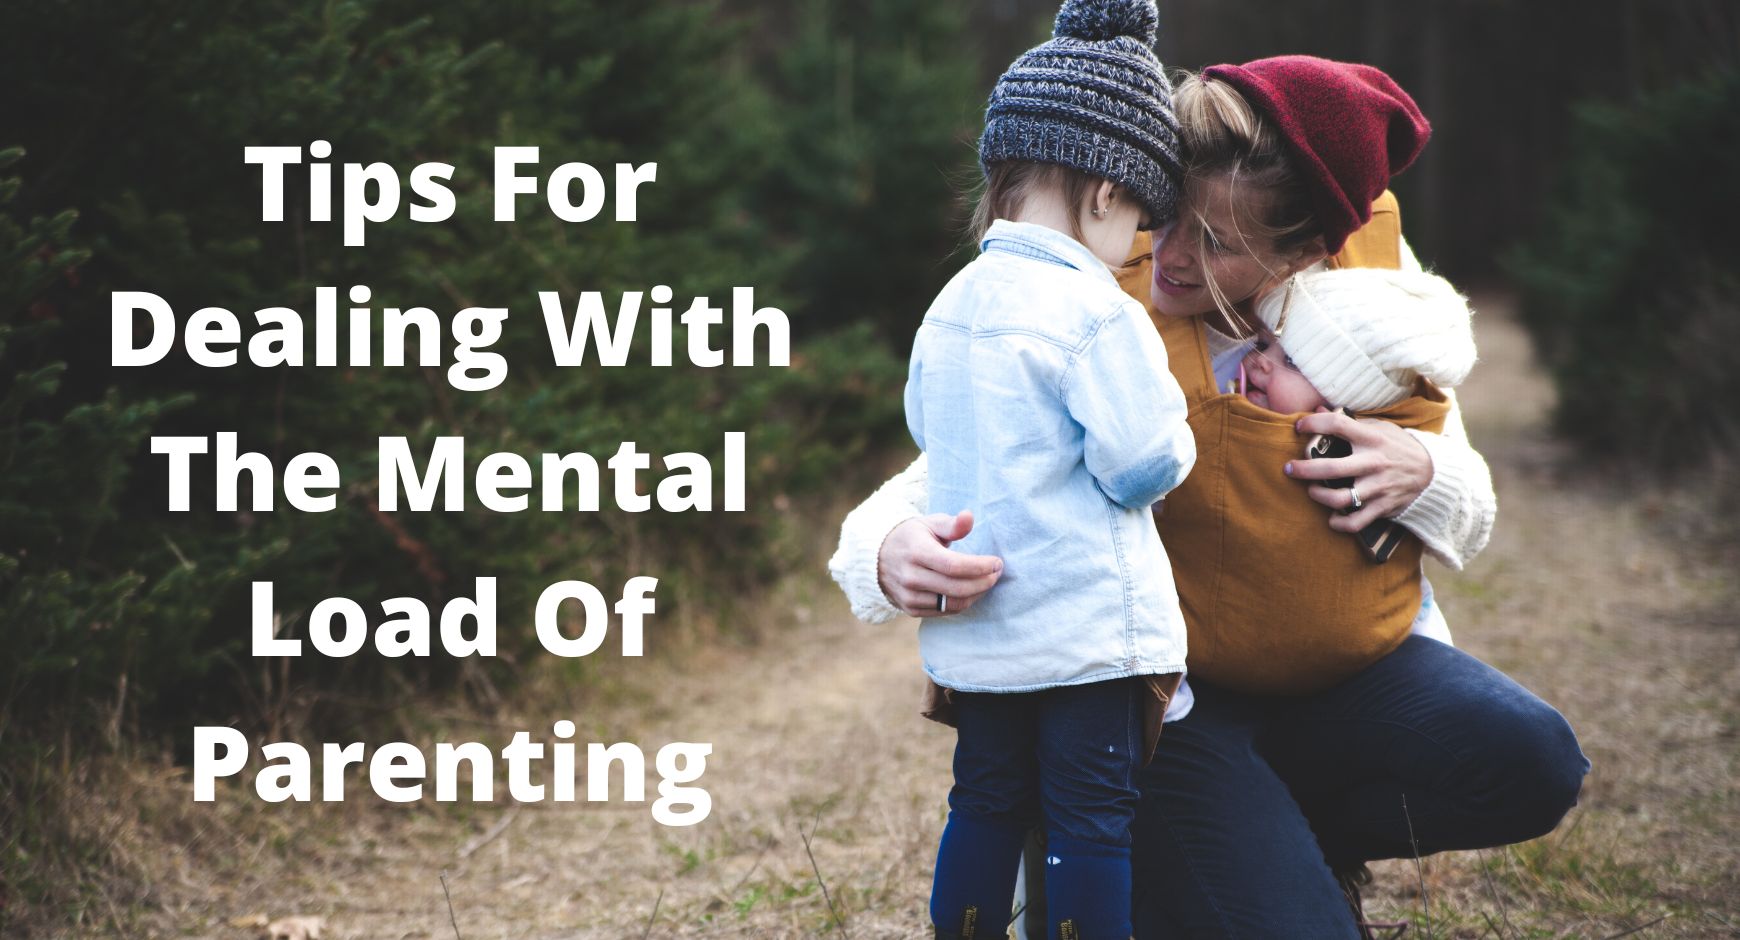 A woman on her knees in the woods with a baby strapped to her chest talking to a toddler standing next to her next to words that read "Tips For Dealing With The Mental Load Of Parenting"